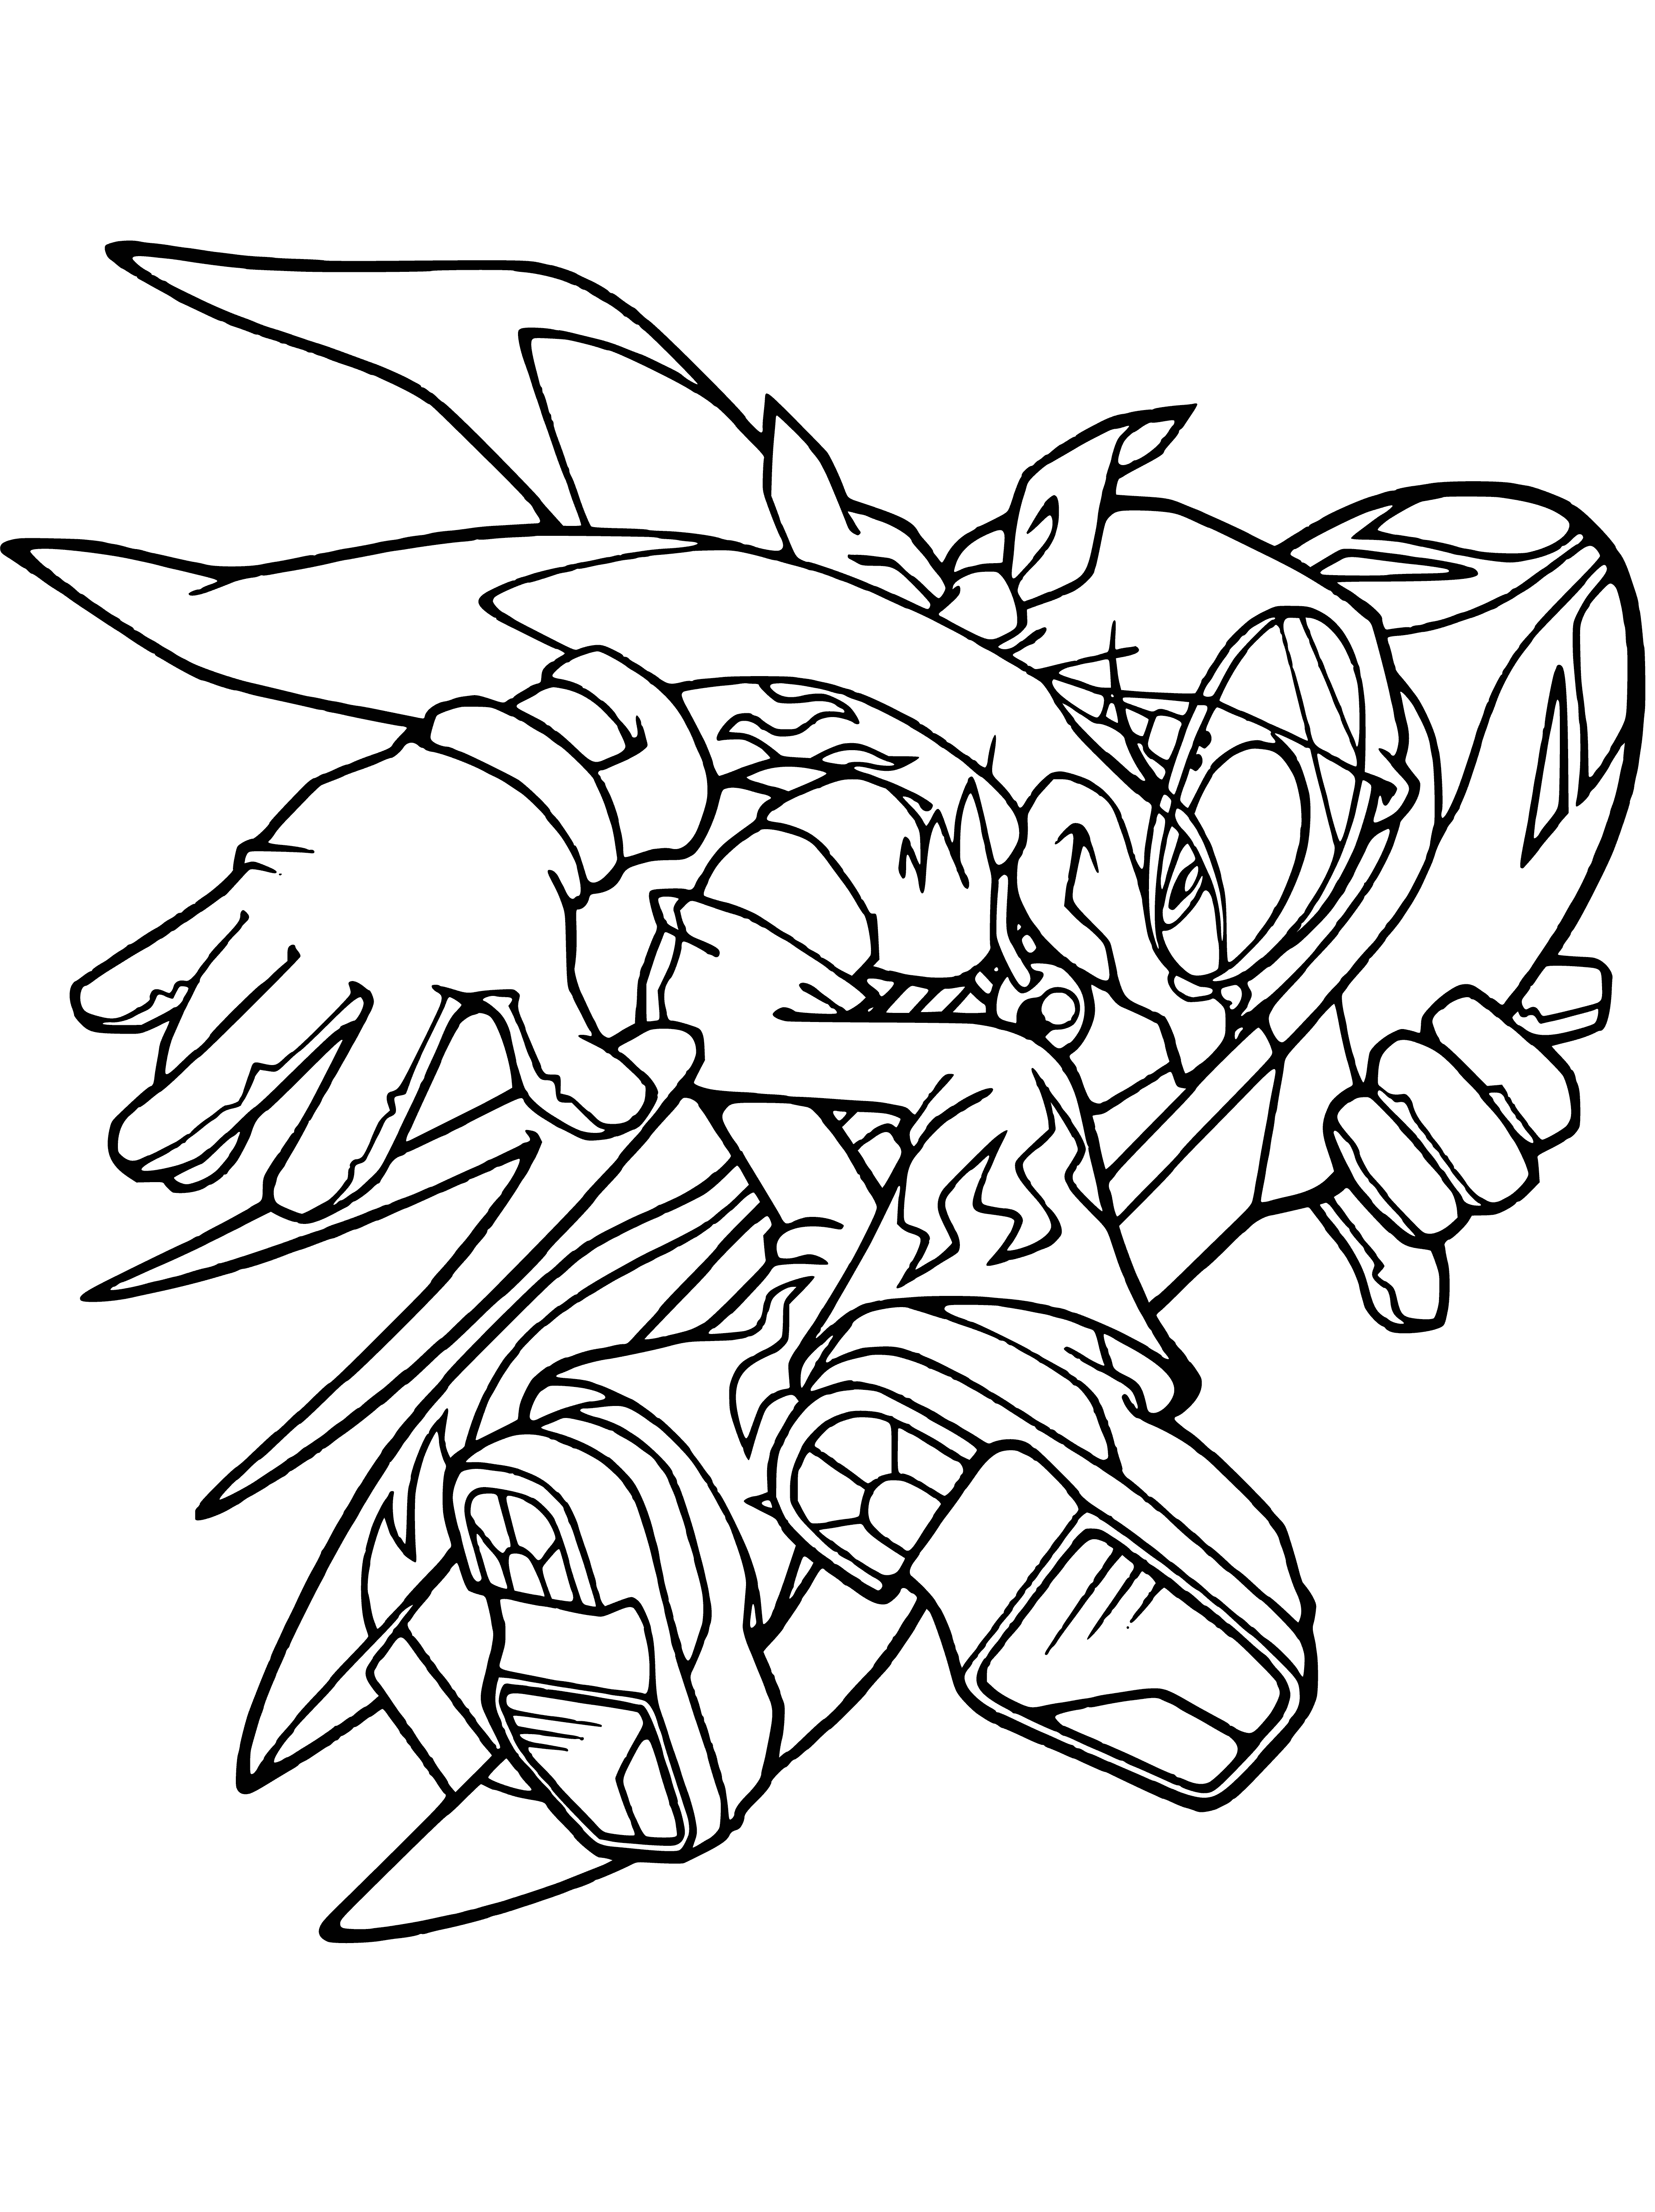 coloring page: Bright blue background w/green wavy lines and yellow oval w/ green S in center. At bottom, white "SONIC" wordmark. #sonic